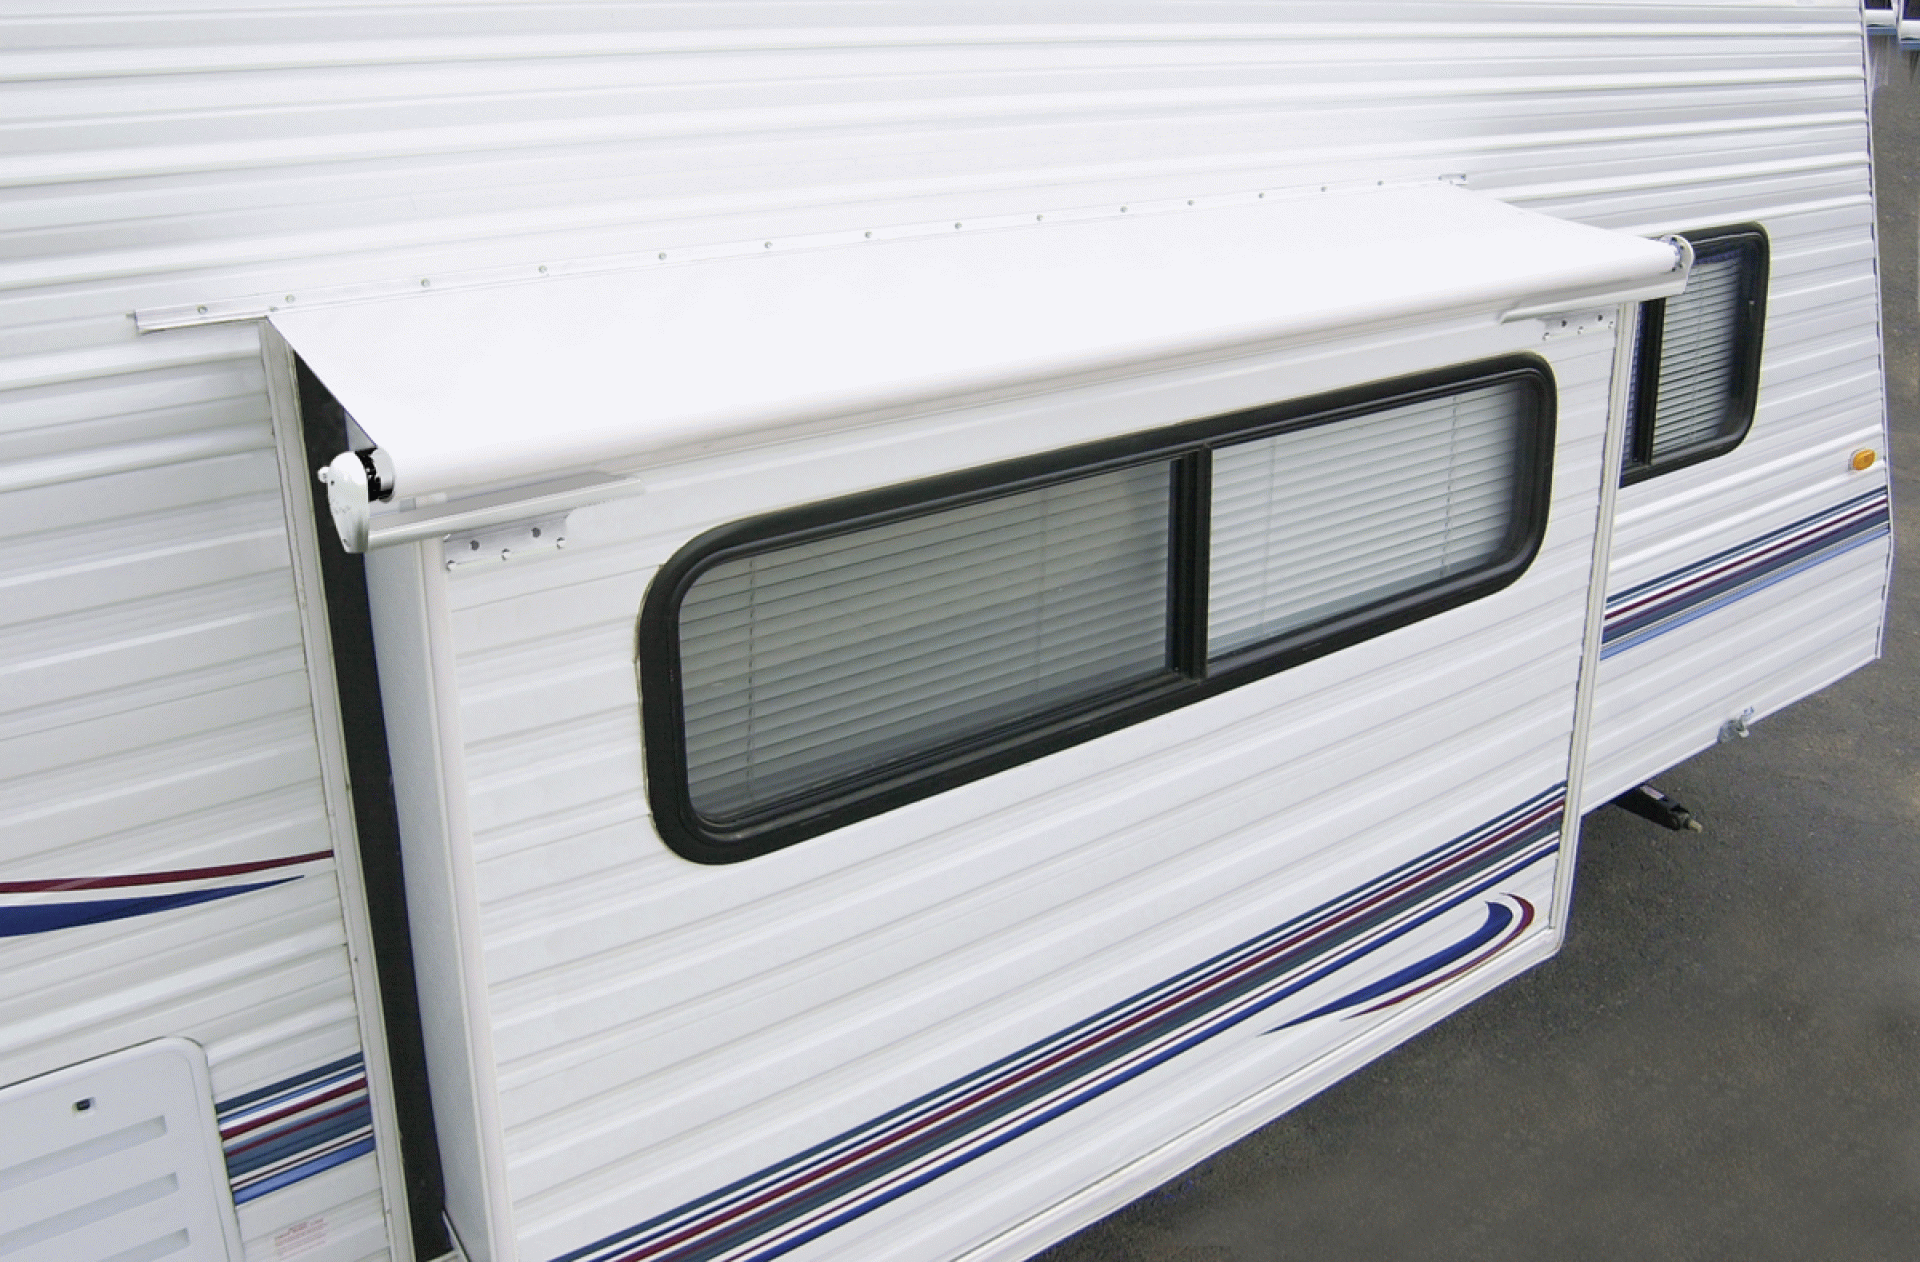 CAREFREE OF COLORADO | LH1290042 | SLIDEOUT COVER AWNING 122" - 129.9" ROOF RANGE WHITE VINYL